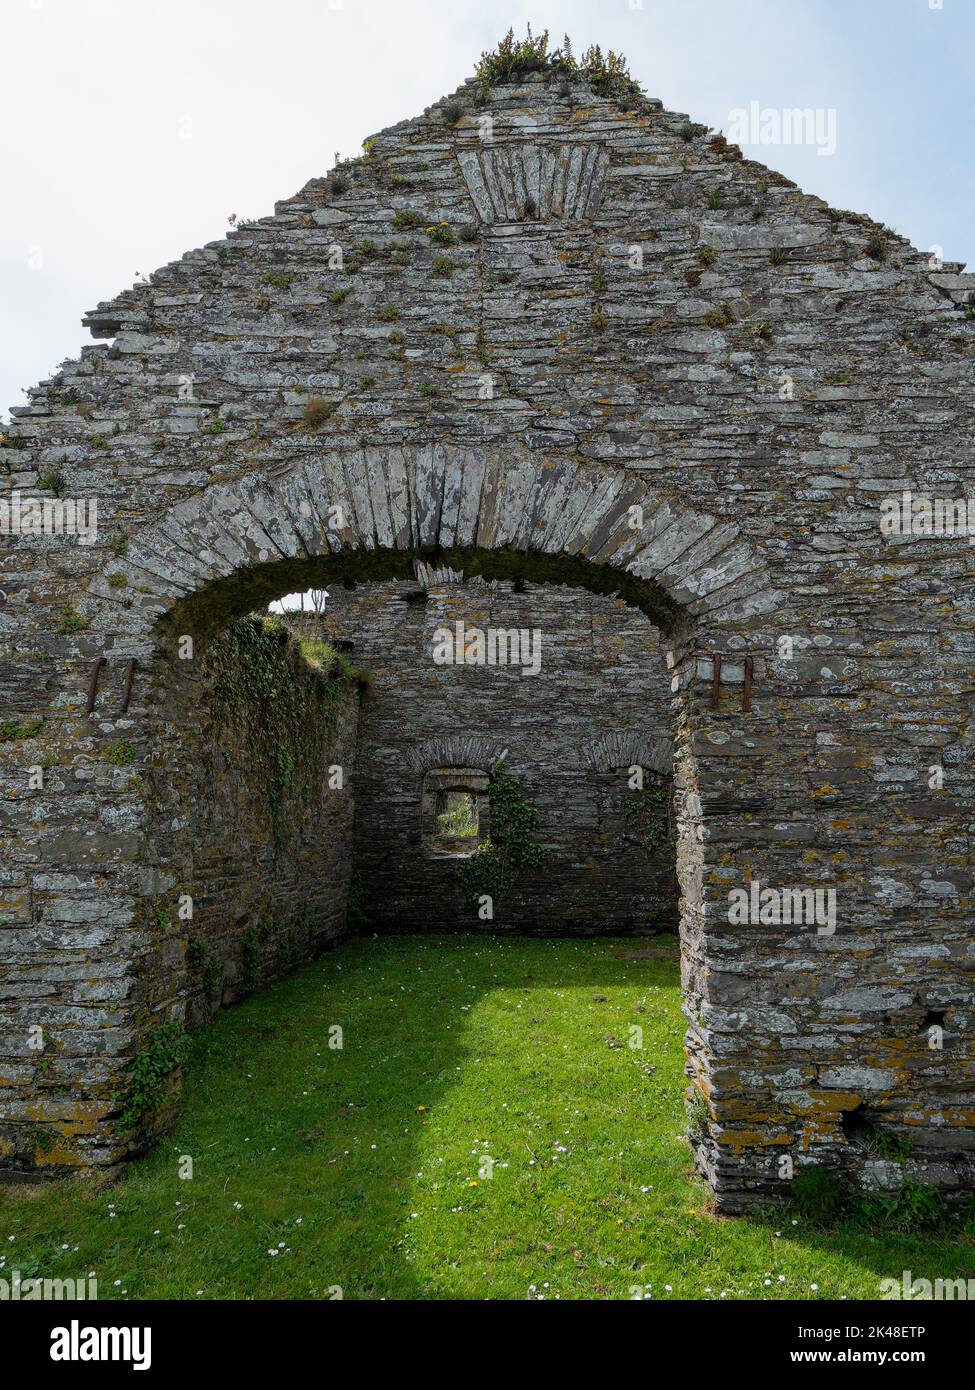 The ruins of an stone building in the Ireland. Ancient European architecture. The ruins of Arundel Grain Store, near Clonakilty, West Cork.The 16th Ce Stock Photo